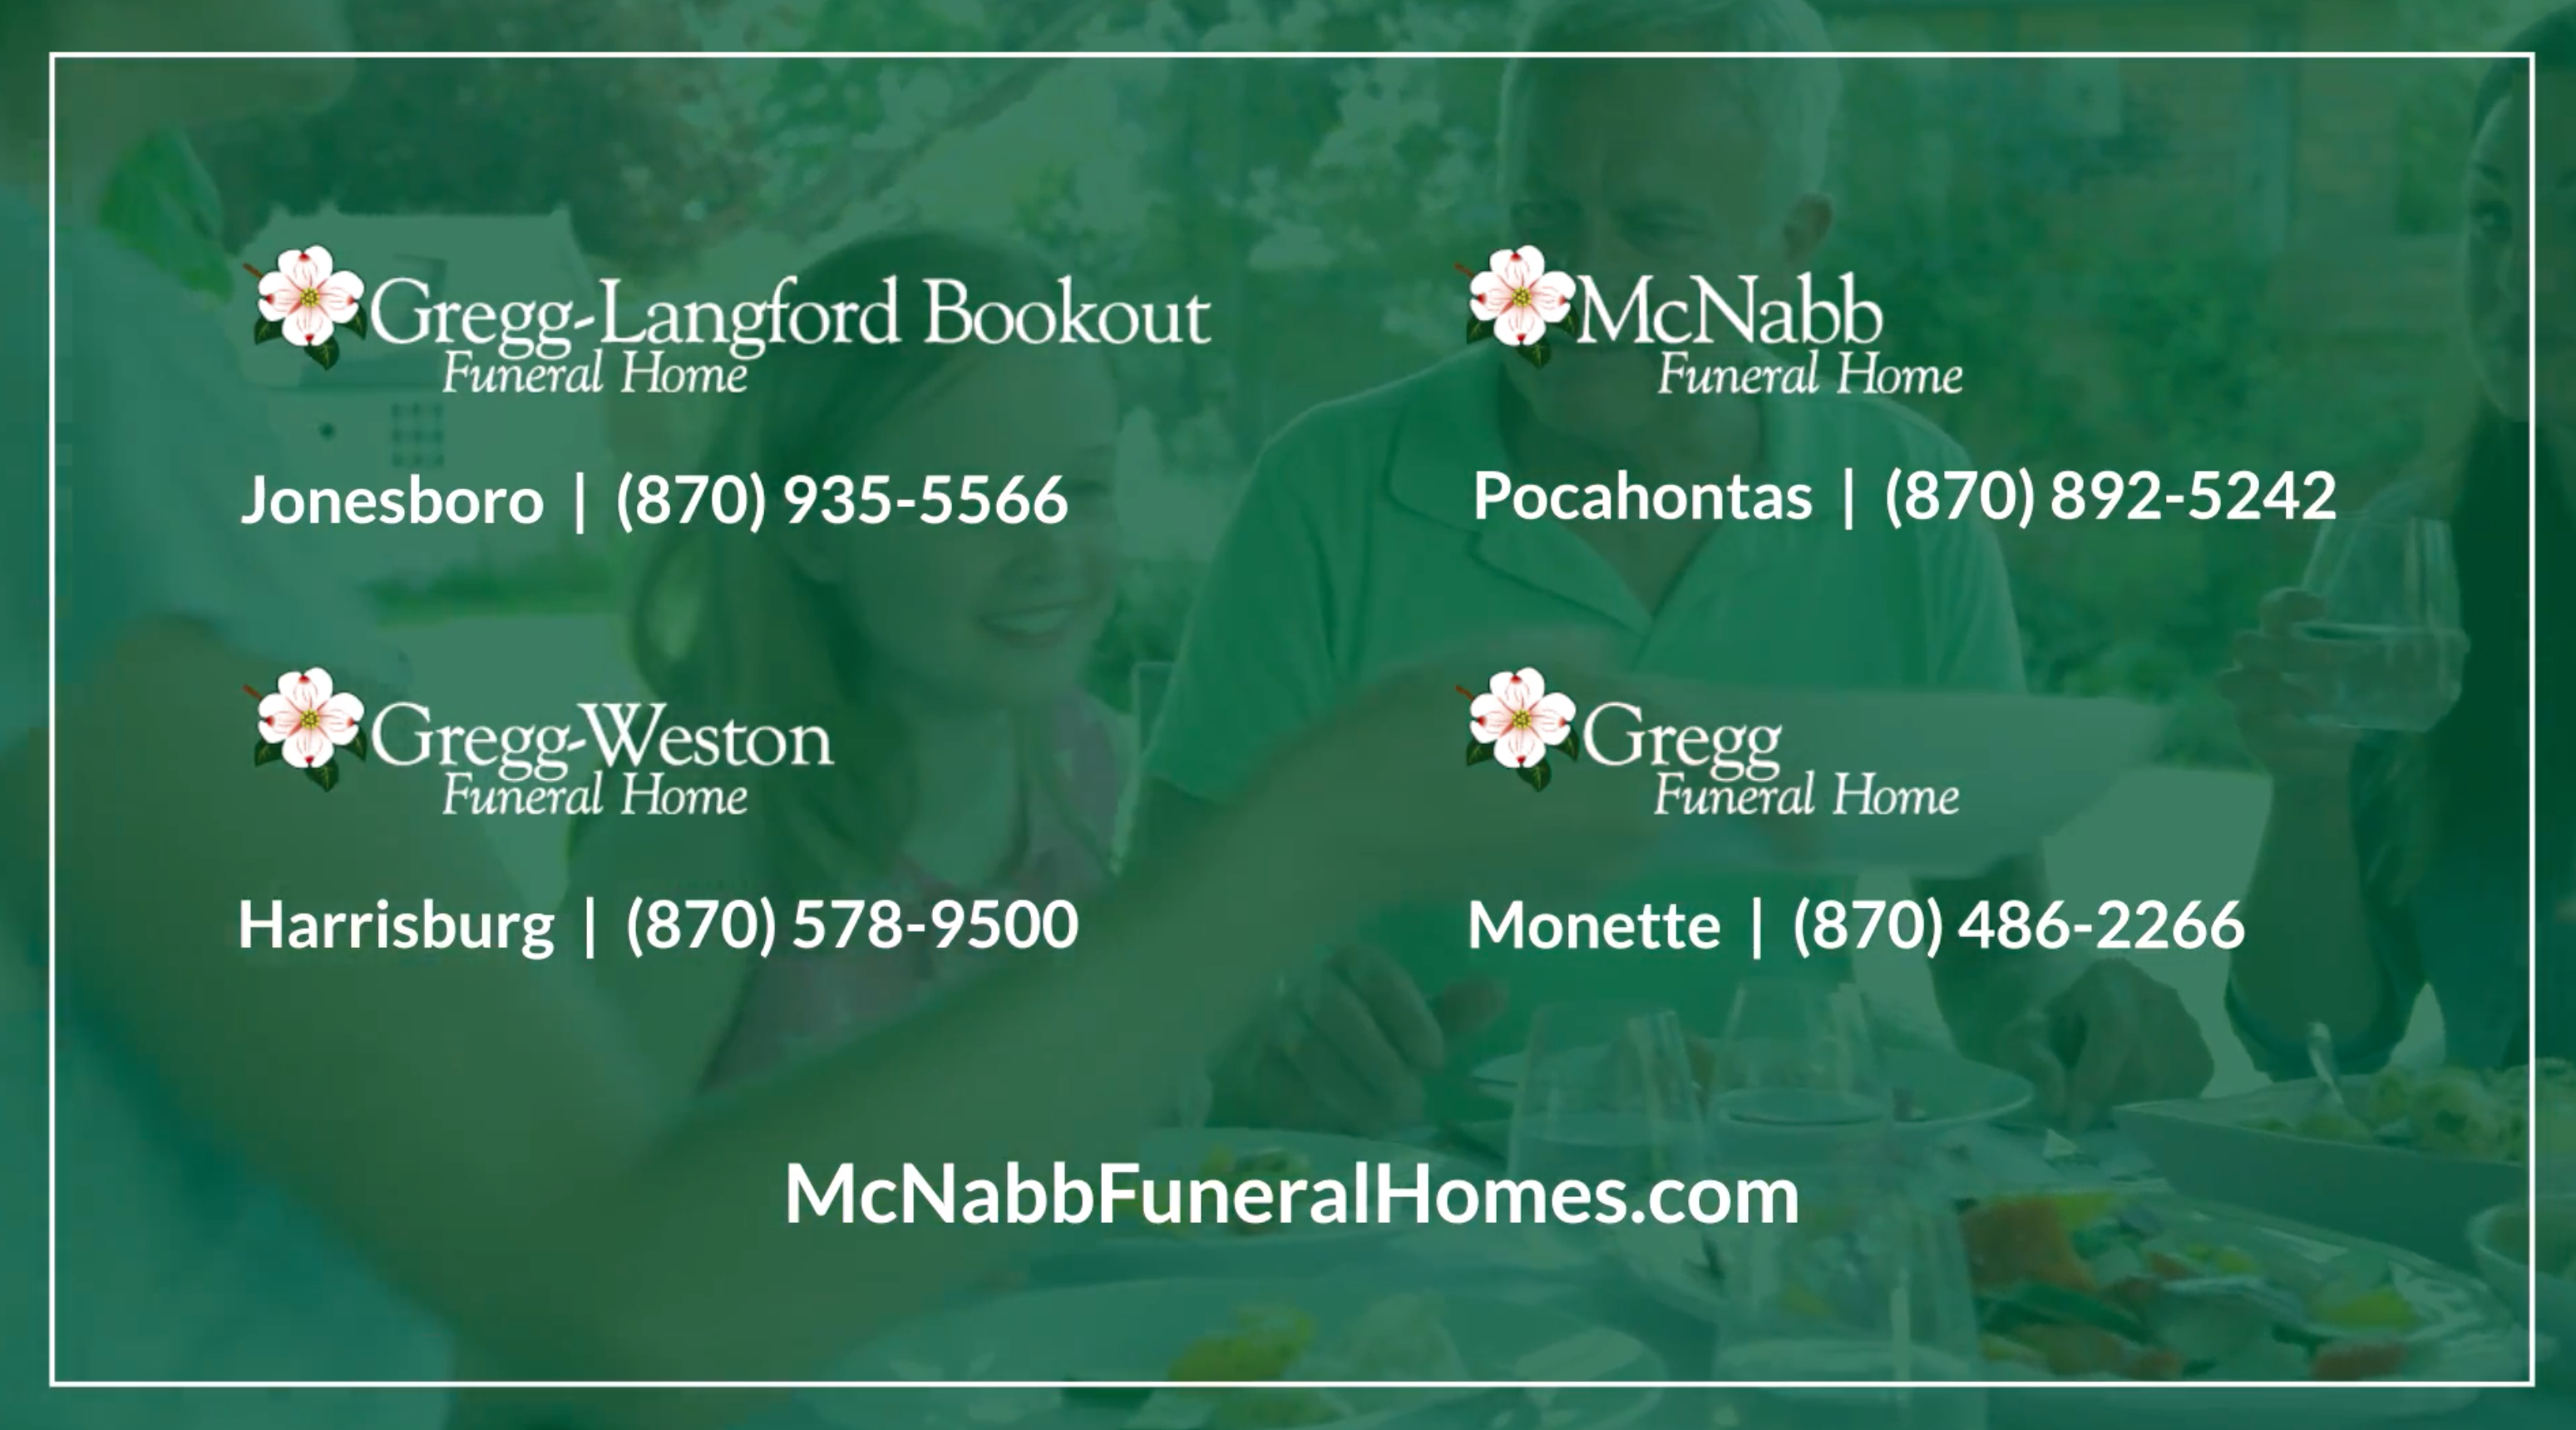 green overlay on image of family with mcnabb locations listed on top 